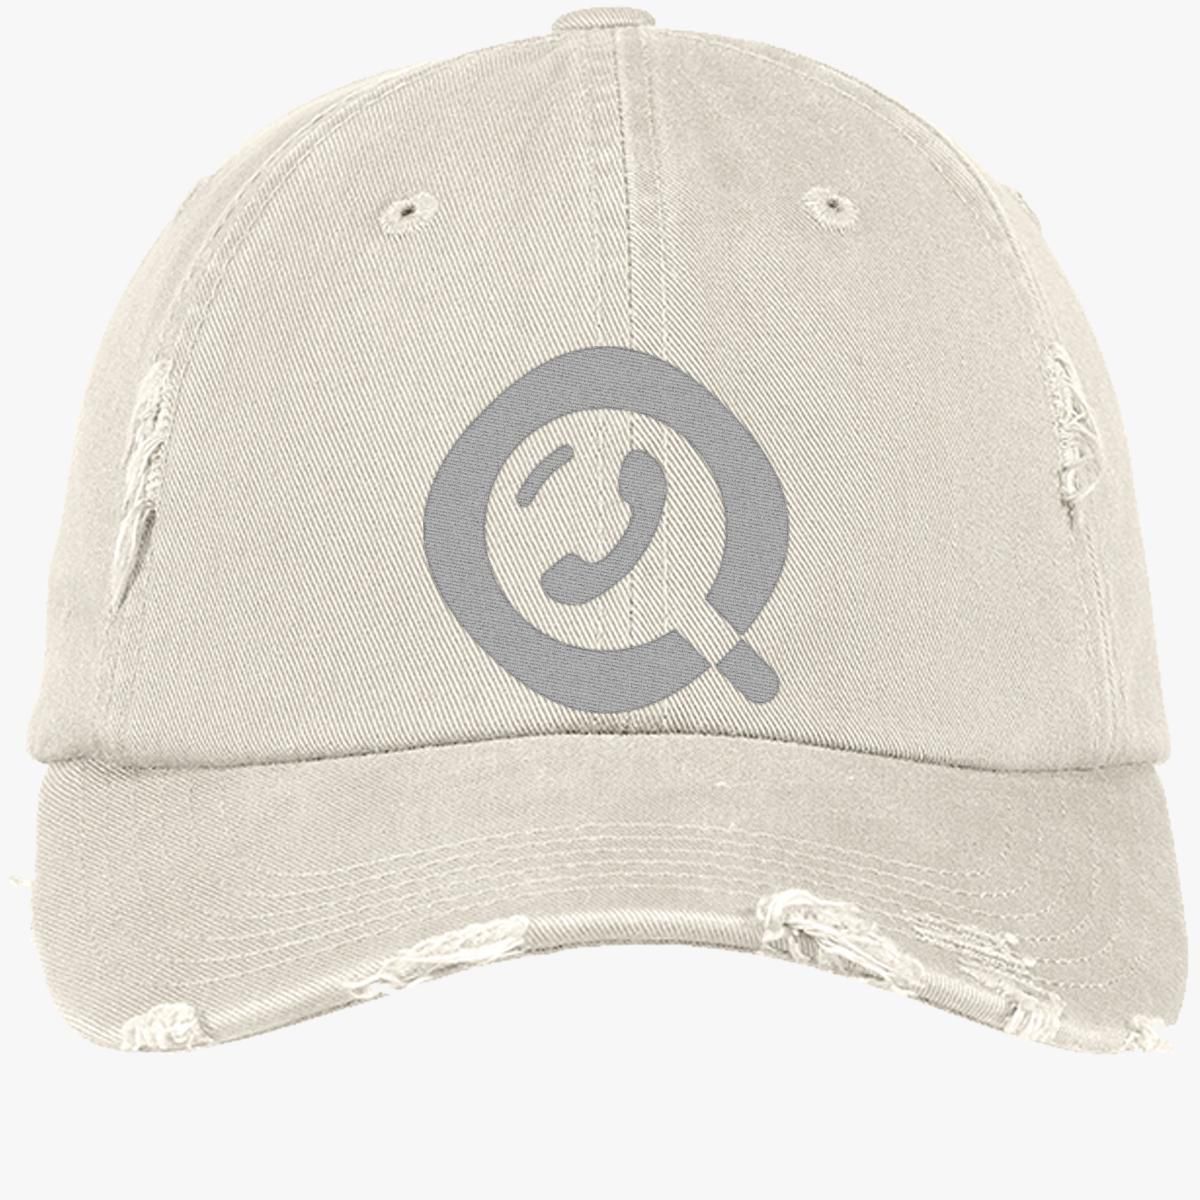 getcontact logo6 Distressed Cotton Twill Cap (Embroidered ...